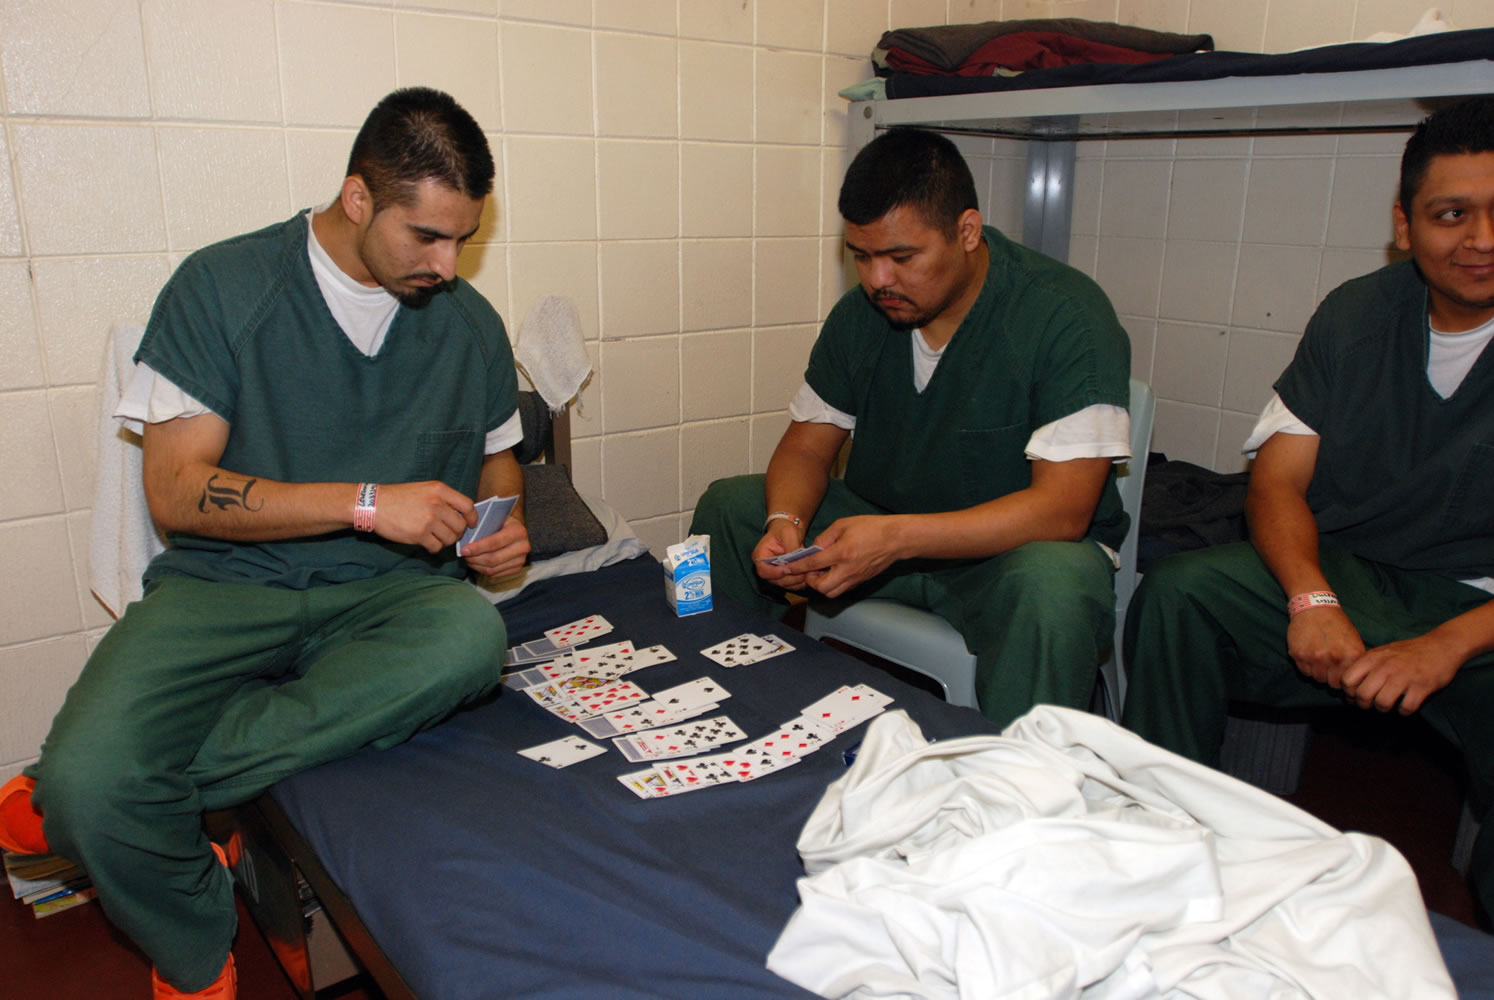 Inmates play cards in the Lane County Jail in Eugene, Ore.